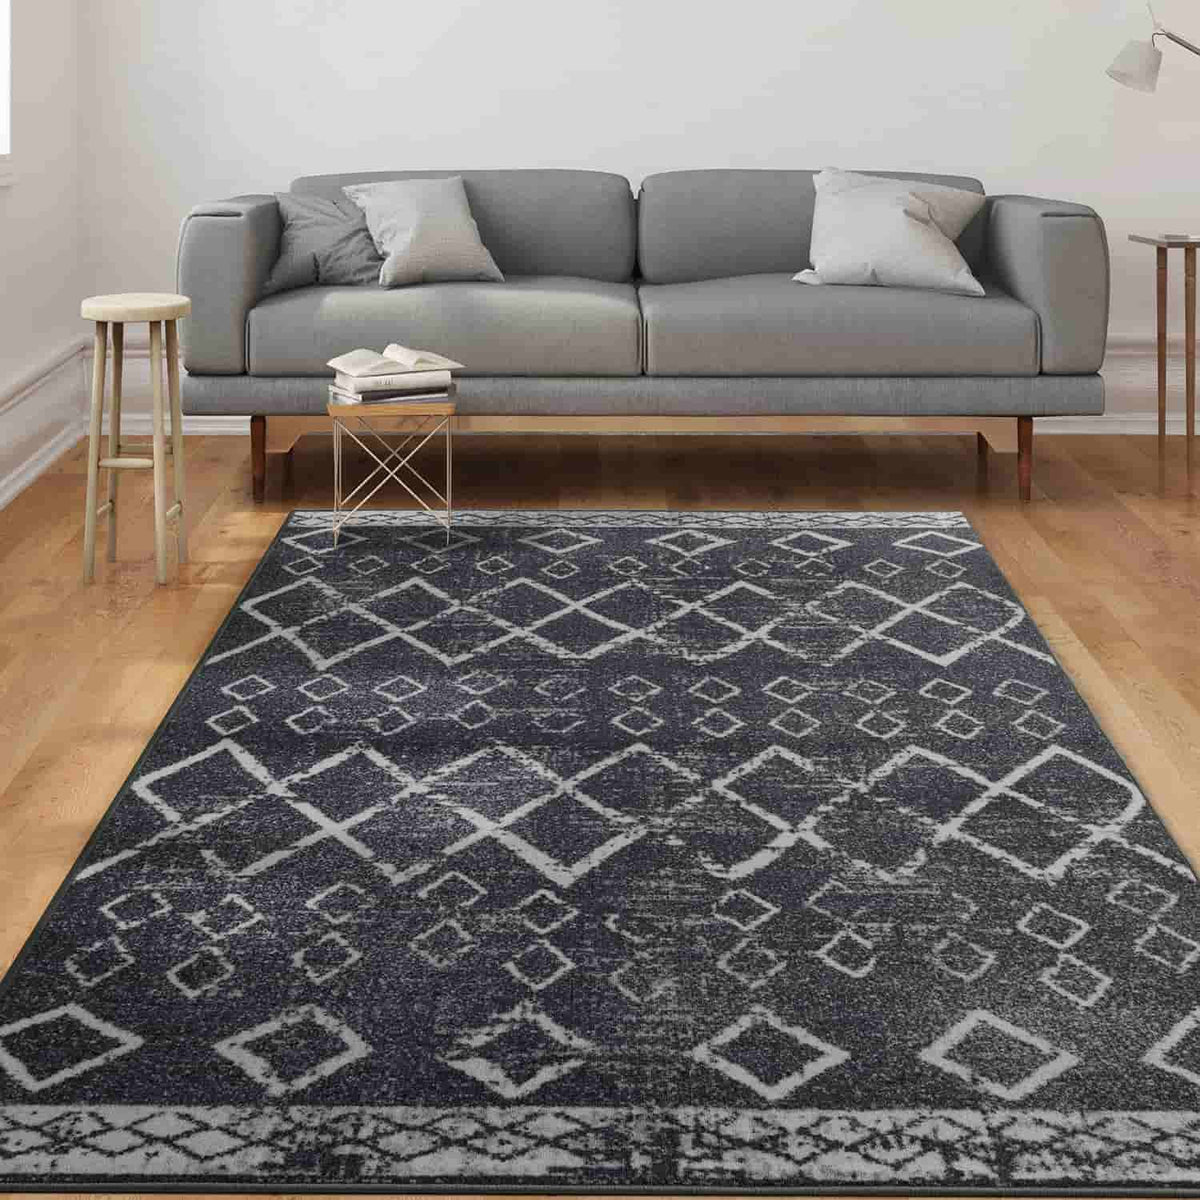 Antep Rugs Alfombras Non-Skid (Non-Slip) 5x7 Rubber Backing Floral Geometric Low Profile Pile Indoor Area Rugs (Navy Blue, 5 x 7 Oval)